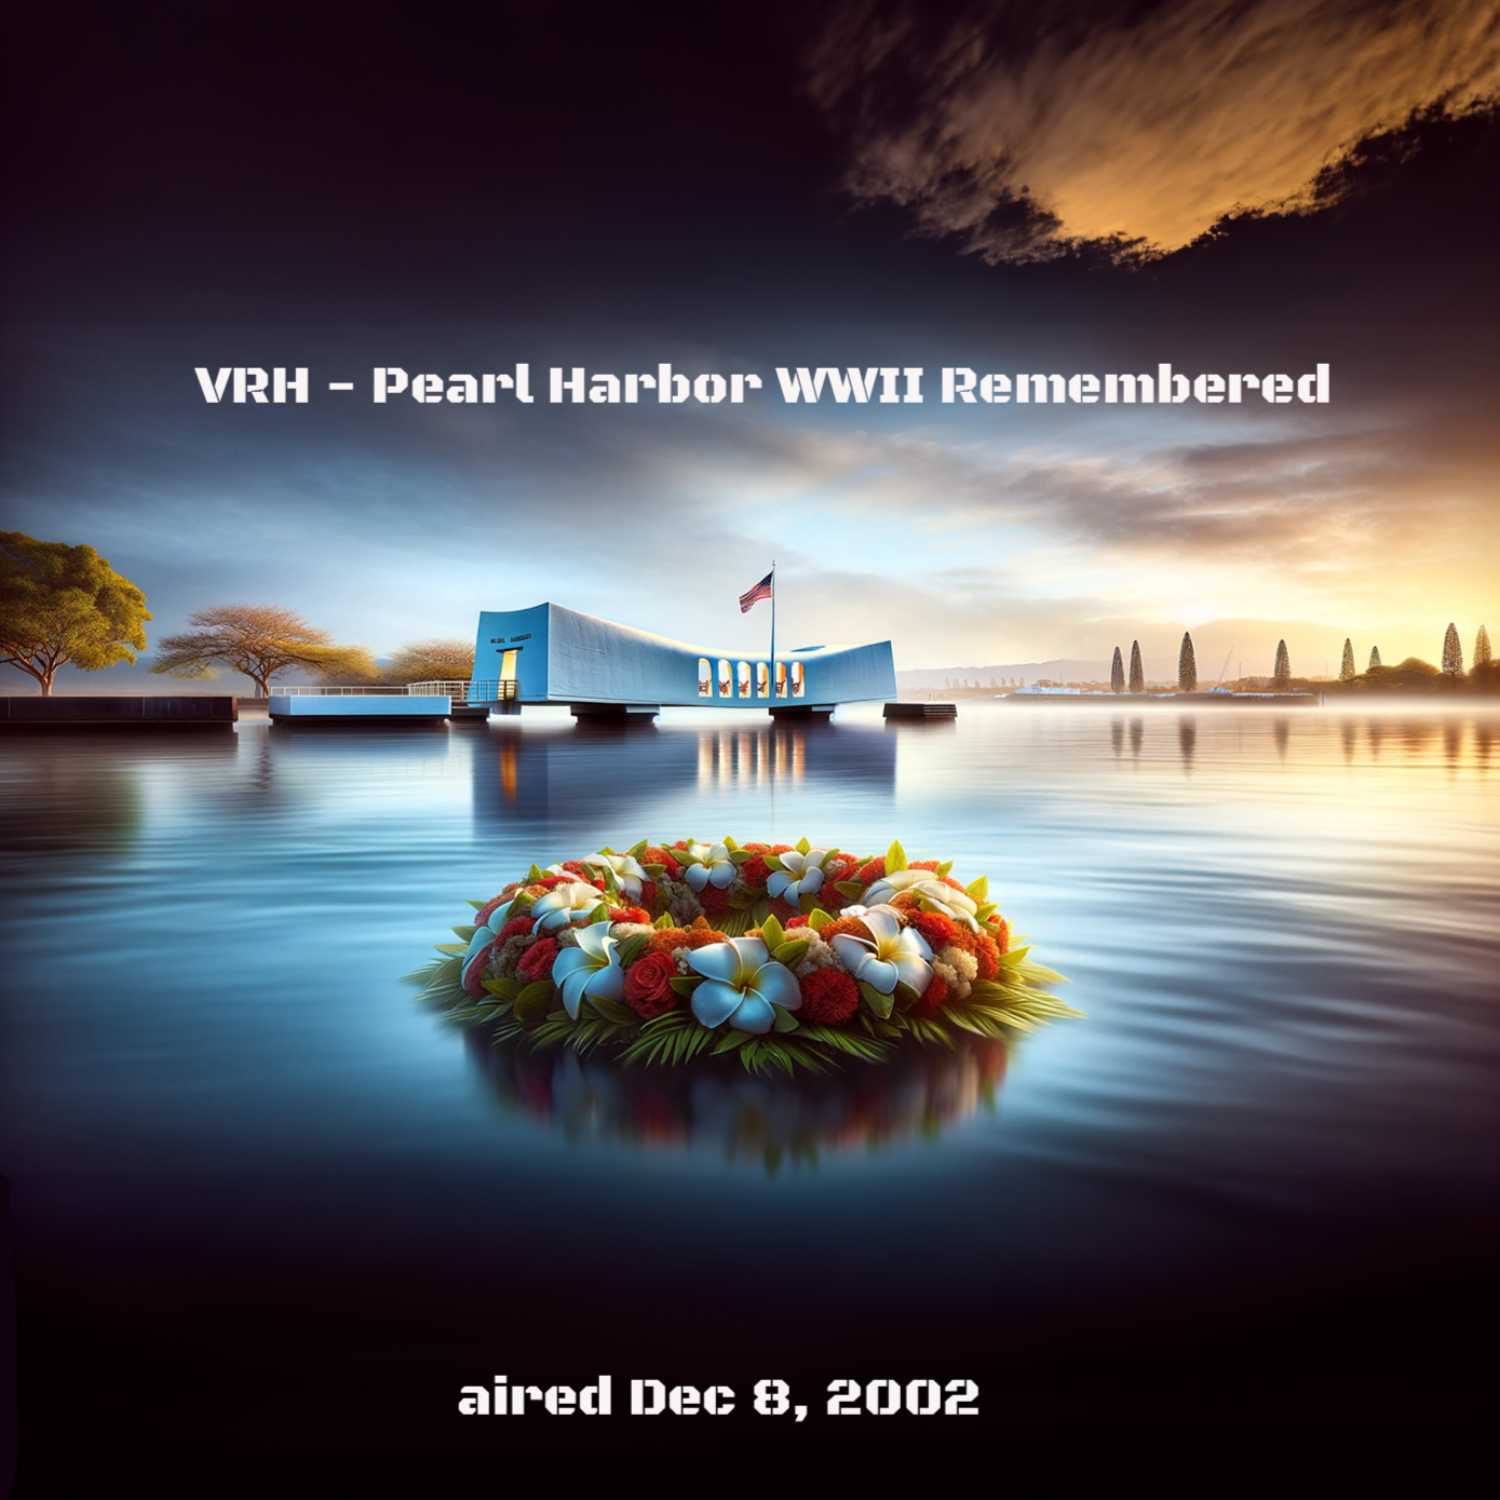 VRH - Pearl Harbor-WWII-Remembered - aired Dec 8, 2002